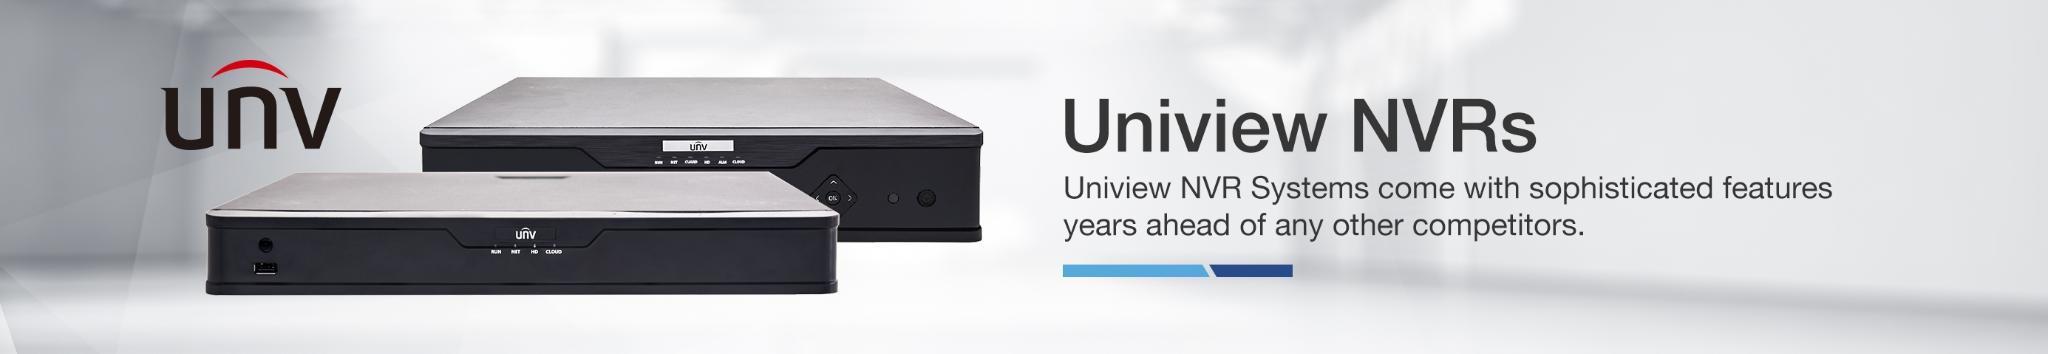 Uniview NVR Systems from Long Beach, CA